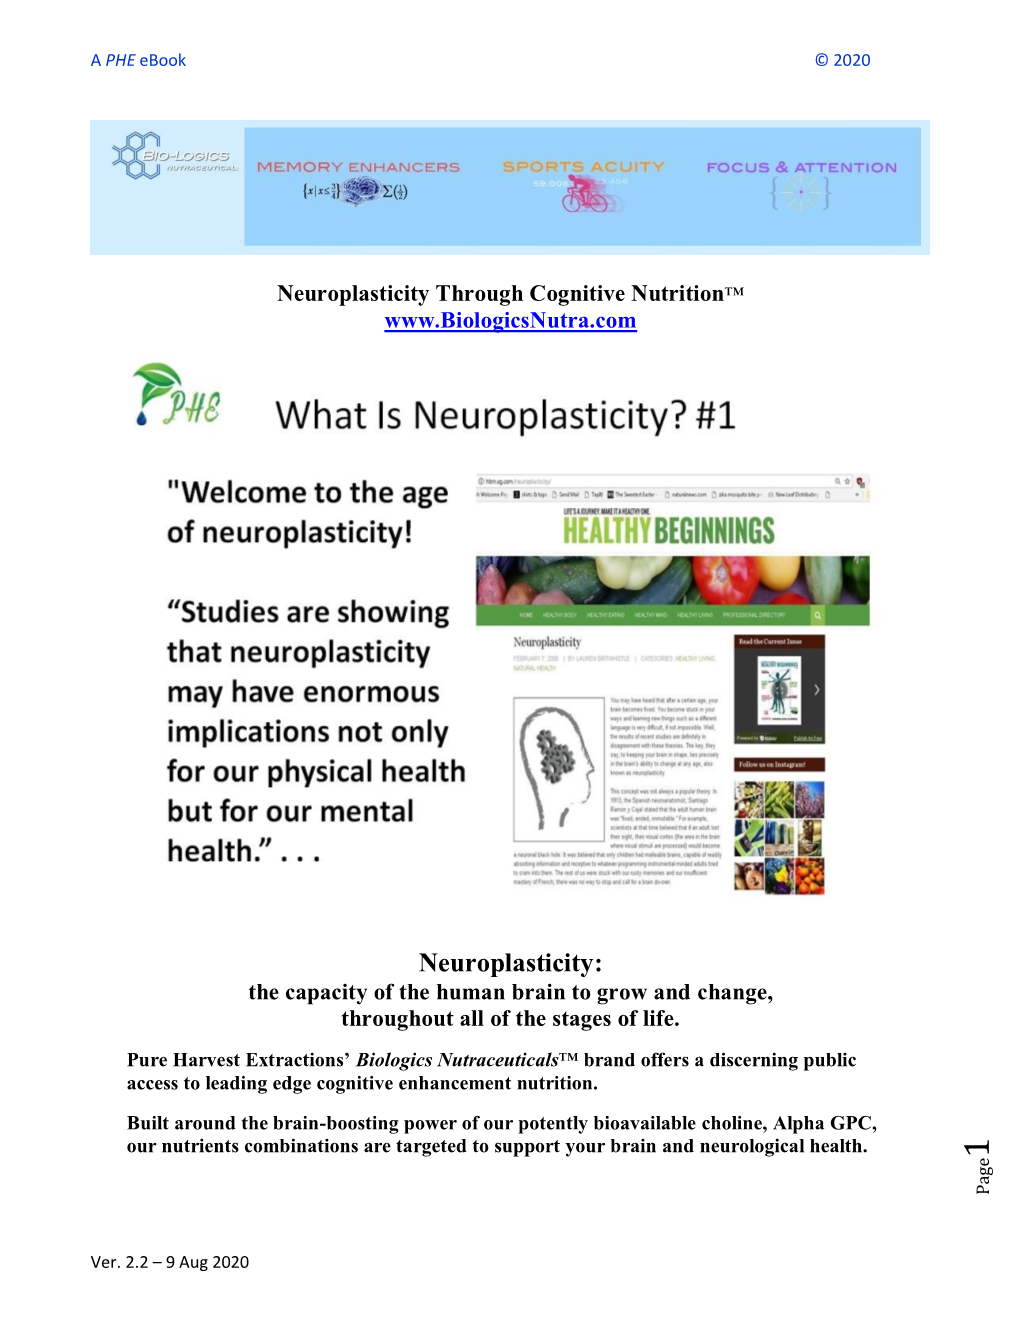 Neuroplasticity: the Capacity of the Human Brain to Grow and Change, Throughout All of the Stages of Life